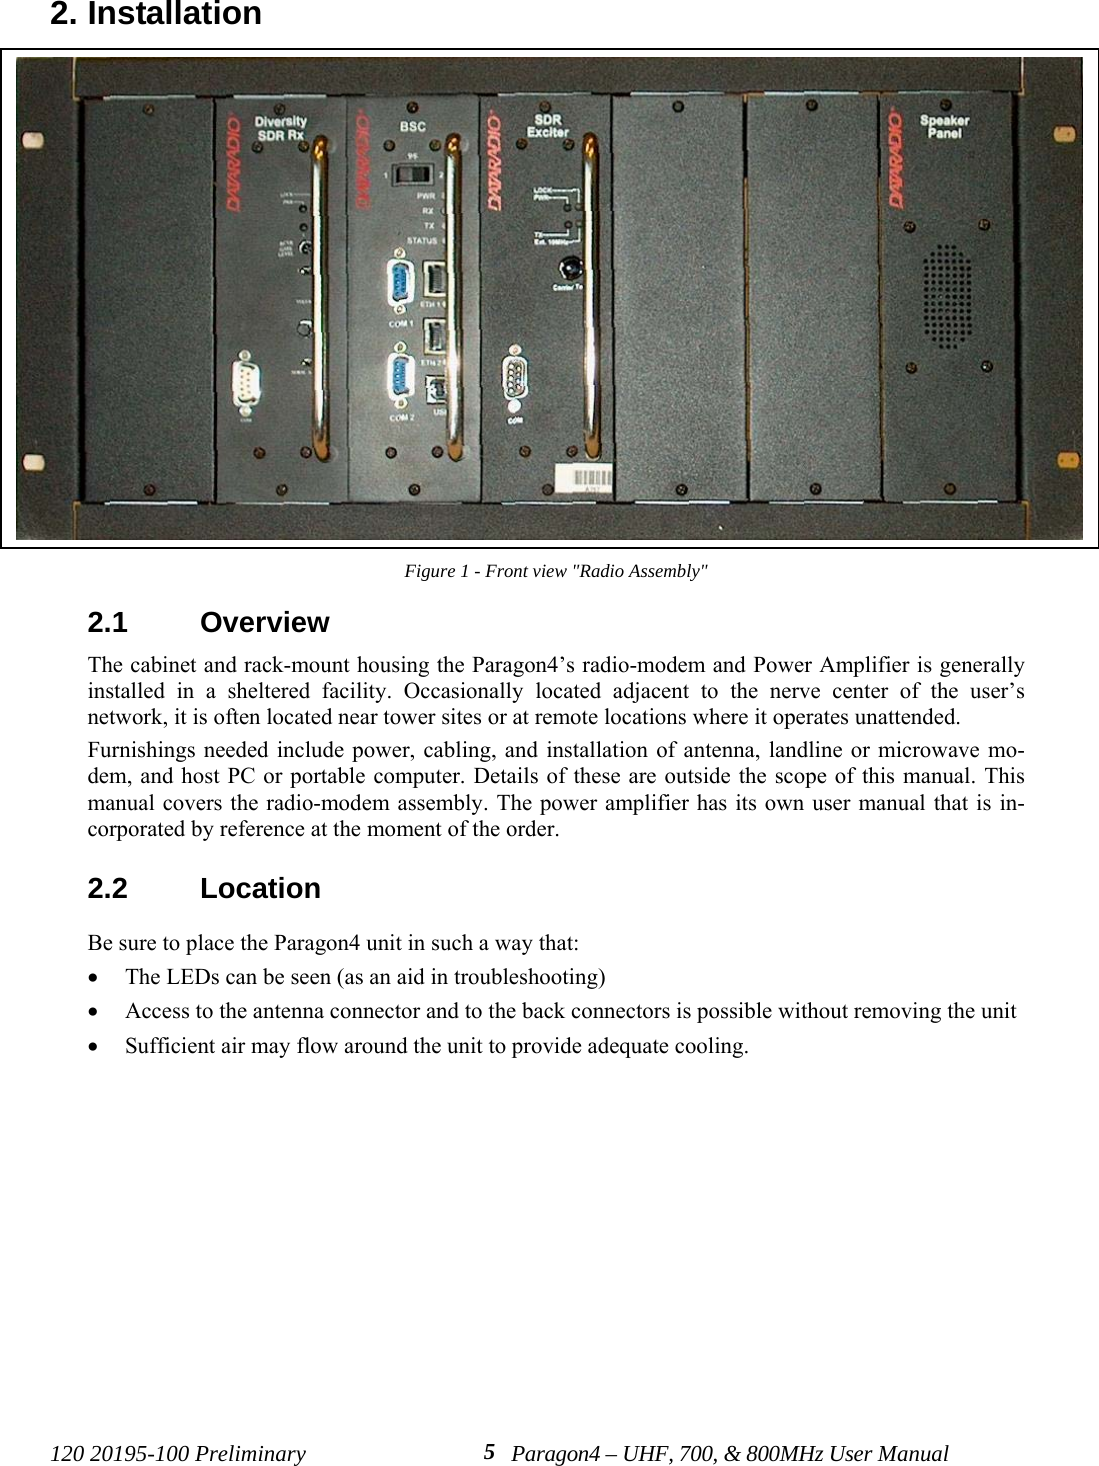 120 20195-100 Preliminary Paragon4 – UHF, 700, &amp; 800MHz User Manual52. InstallationFigure 1 - Front view &quot;Radio Assembly&quot;2.1  OverviewThe cabinet and rack-mount housing the Paragon4’s radio-modem and Power Amplifier is generallyinstalled in a sheltered facility. Occasionally located adjacent to the nerve center of the user’snetwork, it is often located near tower sites or at remote locations where it operates unattended.Furnishings needed include power, cabling, and installation of antenna, landline or microwave mo-dem, and host PC or portable computer. Details of these are outside the scope of this manual. Thismanual covers the radio-modem assembly. The power amplifier has its own user manual that is in-corporated by reference at the moment of the order.2.2  LocationBe sure to place the Paragon4 unit in such a way that:• The LEDs can be seen (as an aid in troubleshooting)• Access to the antenna connector and to the back connectors is possible without removing the unit • Sufficient air may flow around the unit to provide adequate cooling.